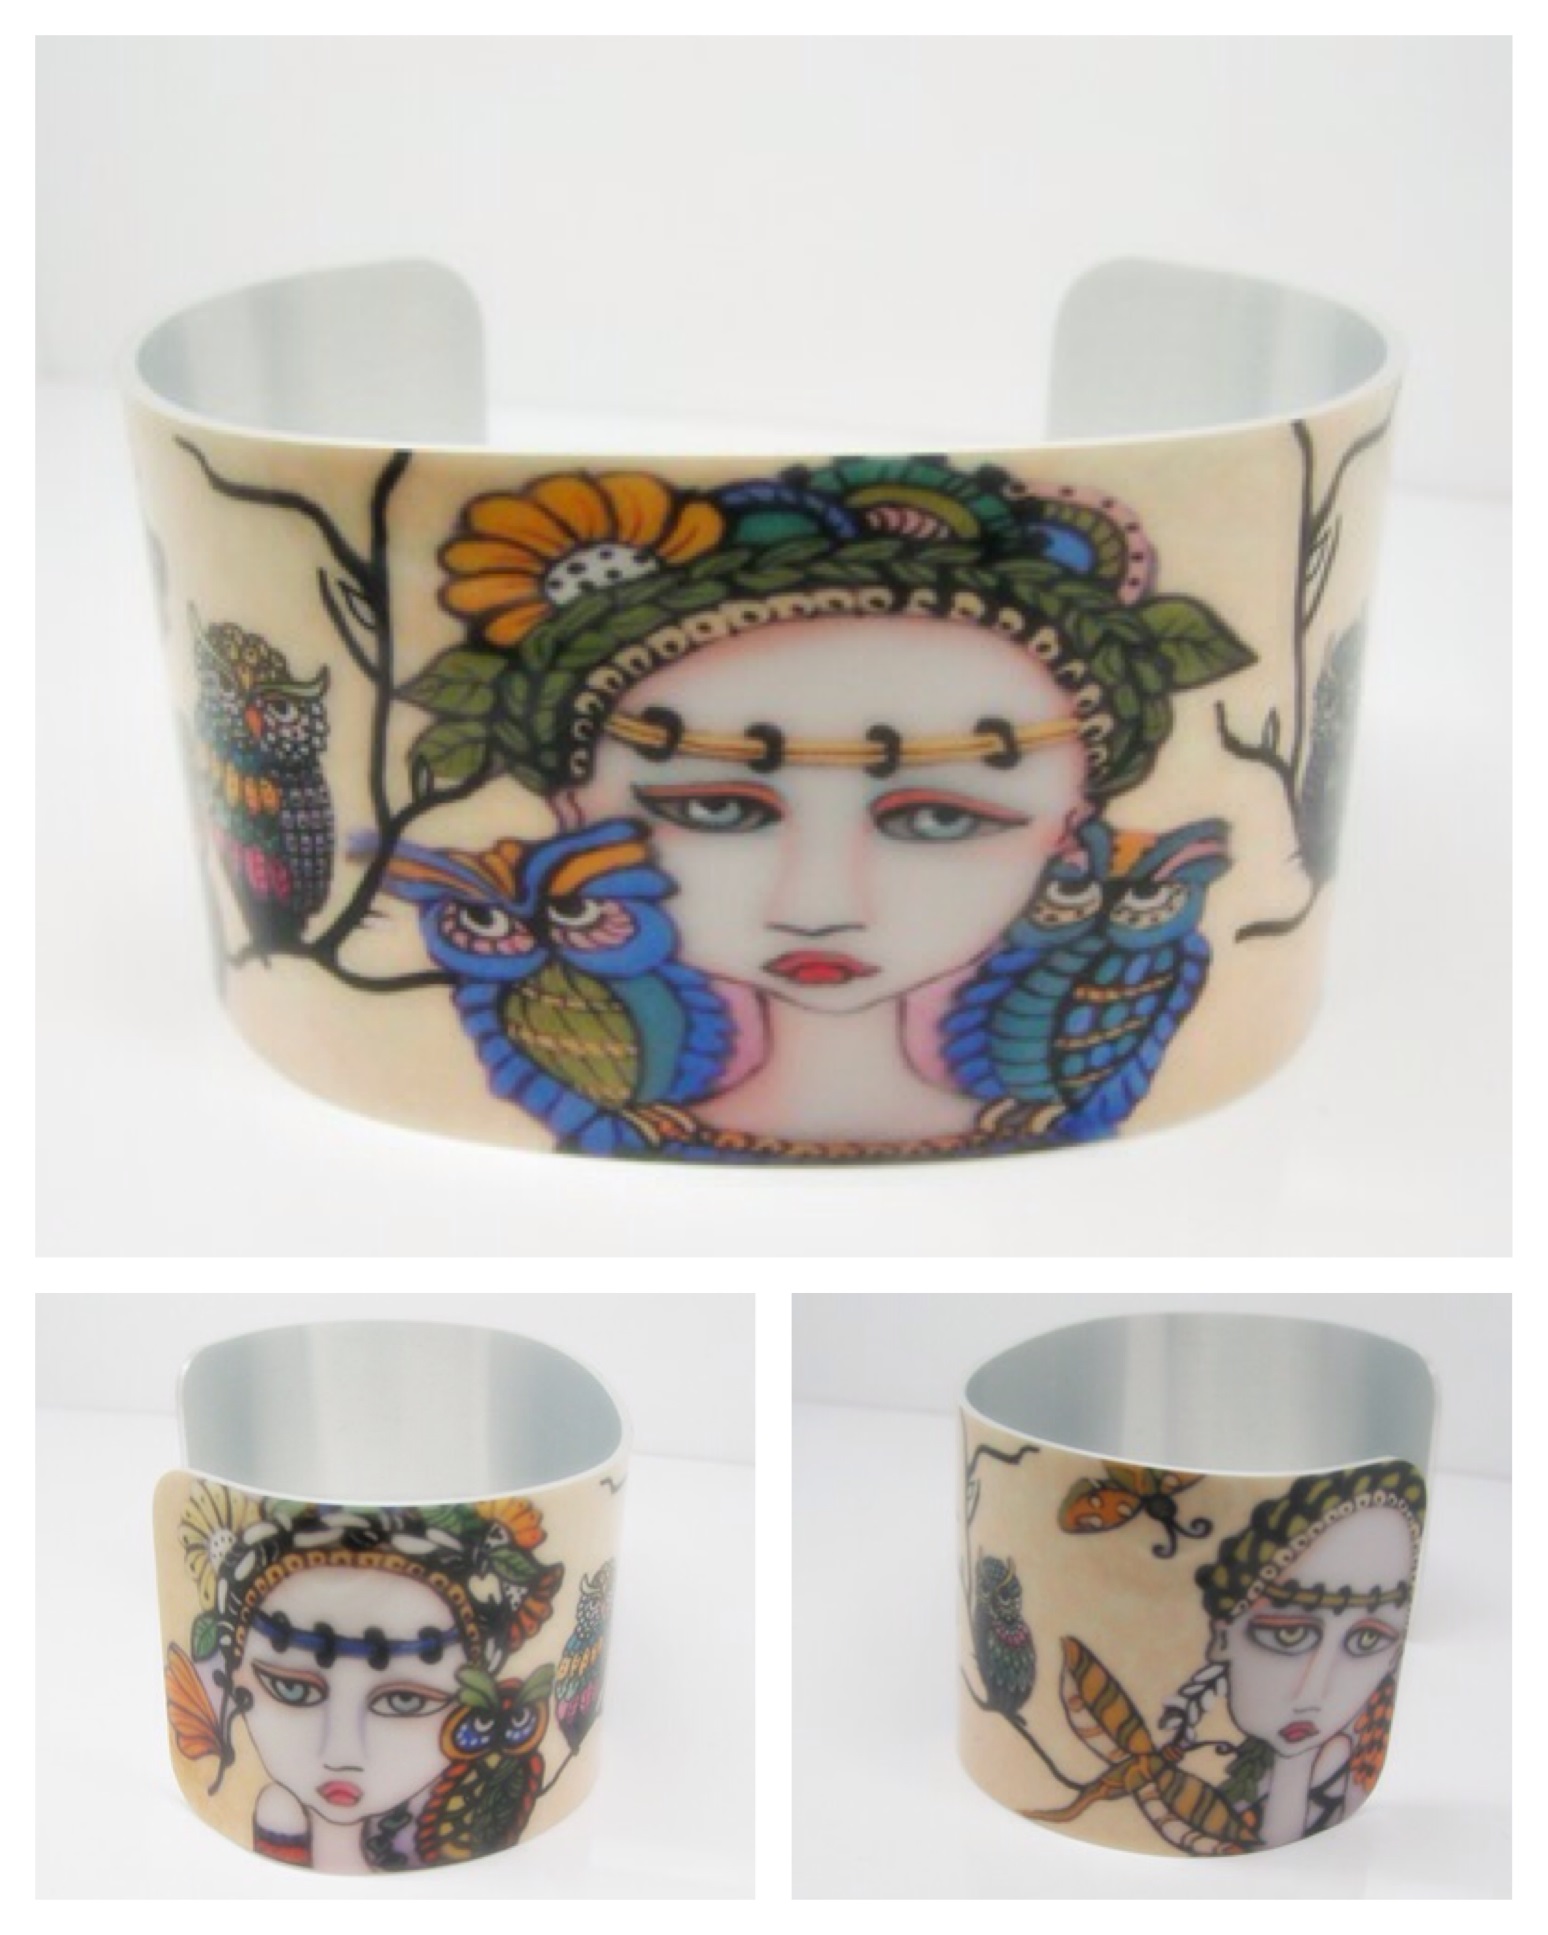 Woodland Fairies Cuff Bracelet made with sublimation printing